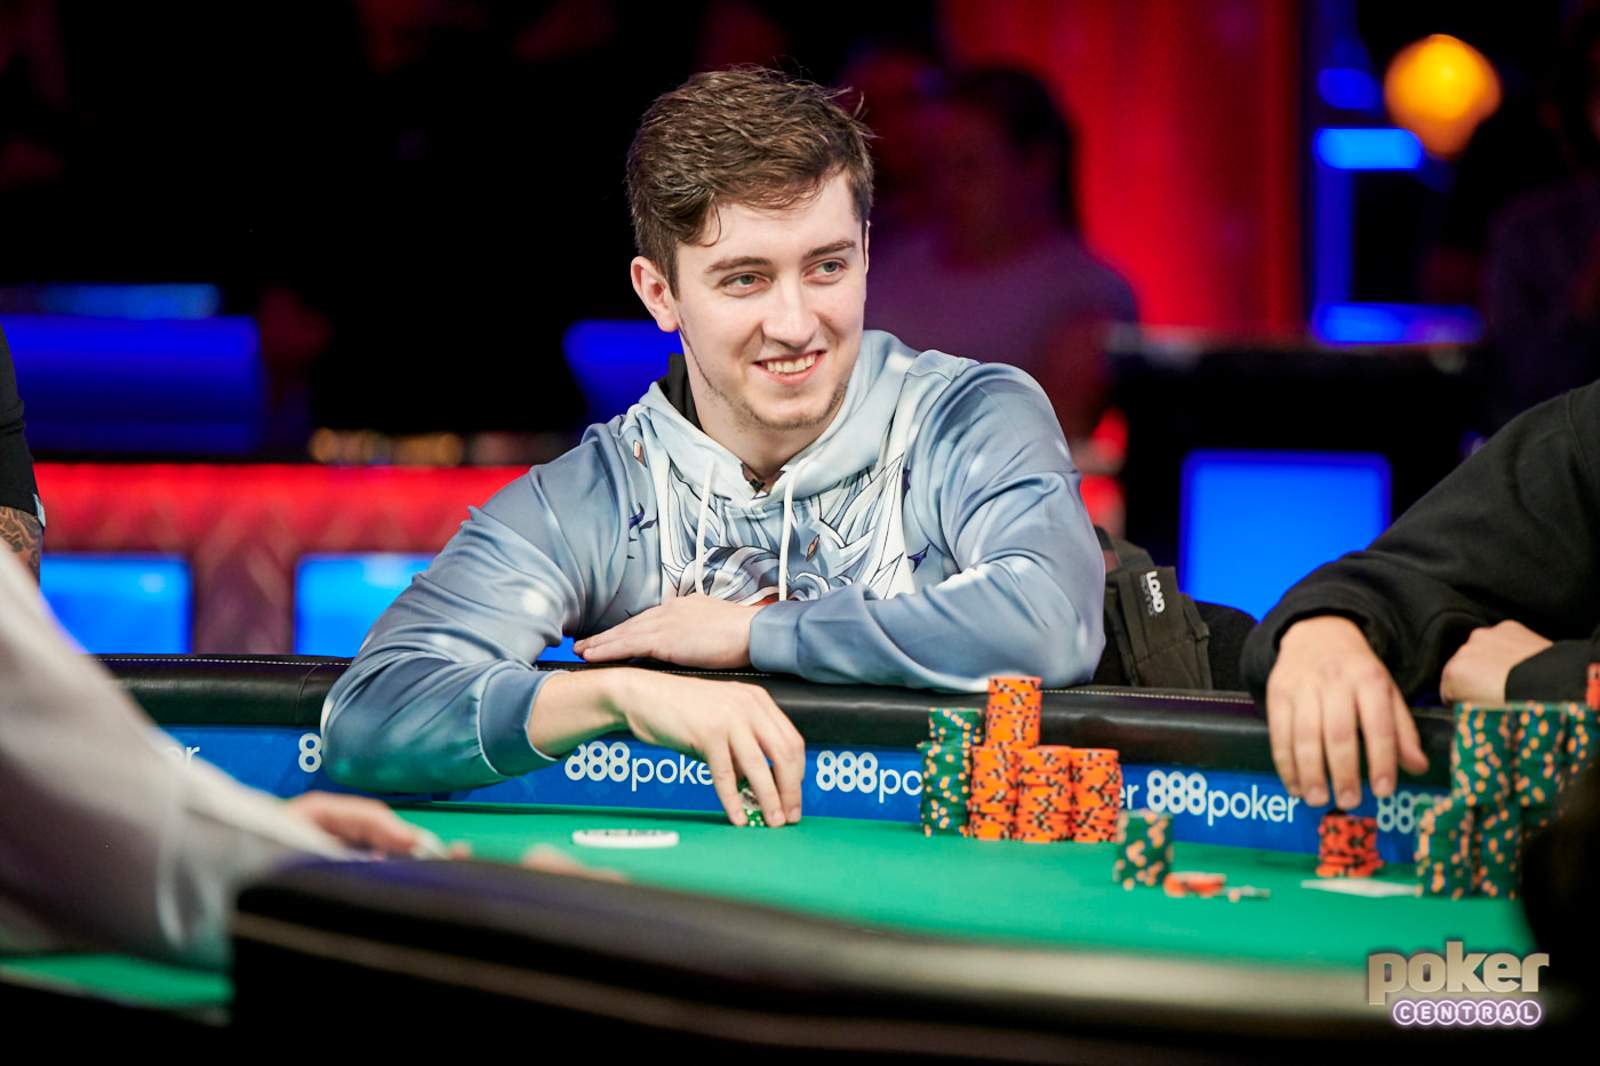 WSOP Report Day #2 - Green Gets Gold as Negreanu and Imsirovic Fall Short